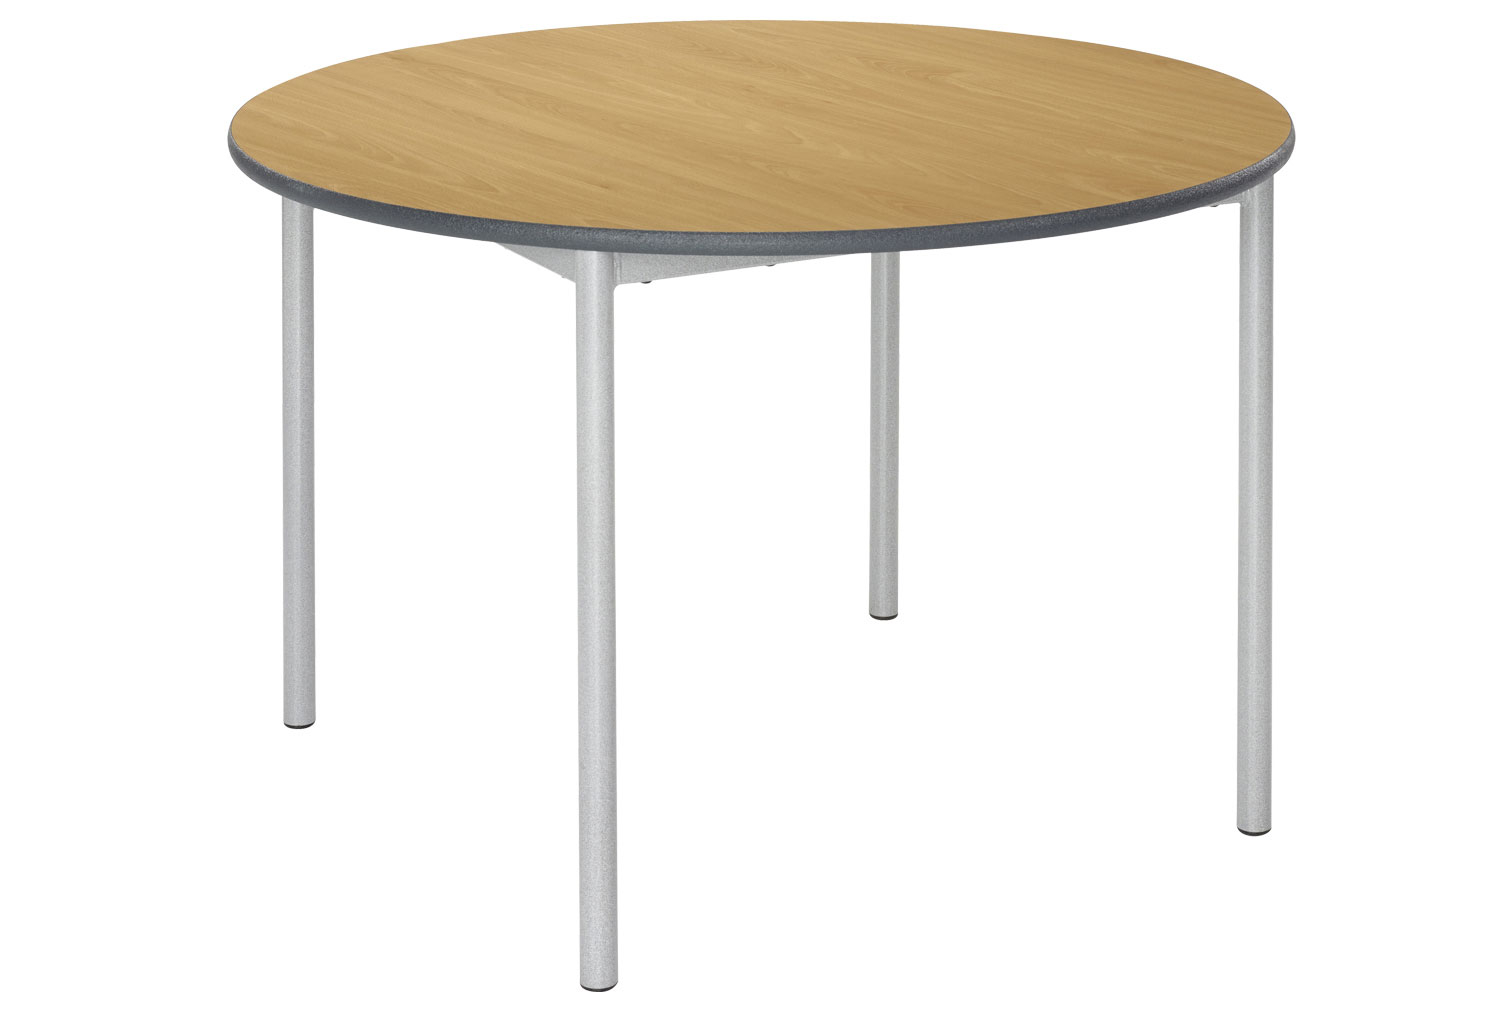 Qty 4 - RT32 Circular Classroom Tables 11-14 Years, 120diax71h (cm), Speckled Grey Frame, White Top, MDF Beech Edge